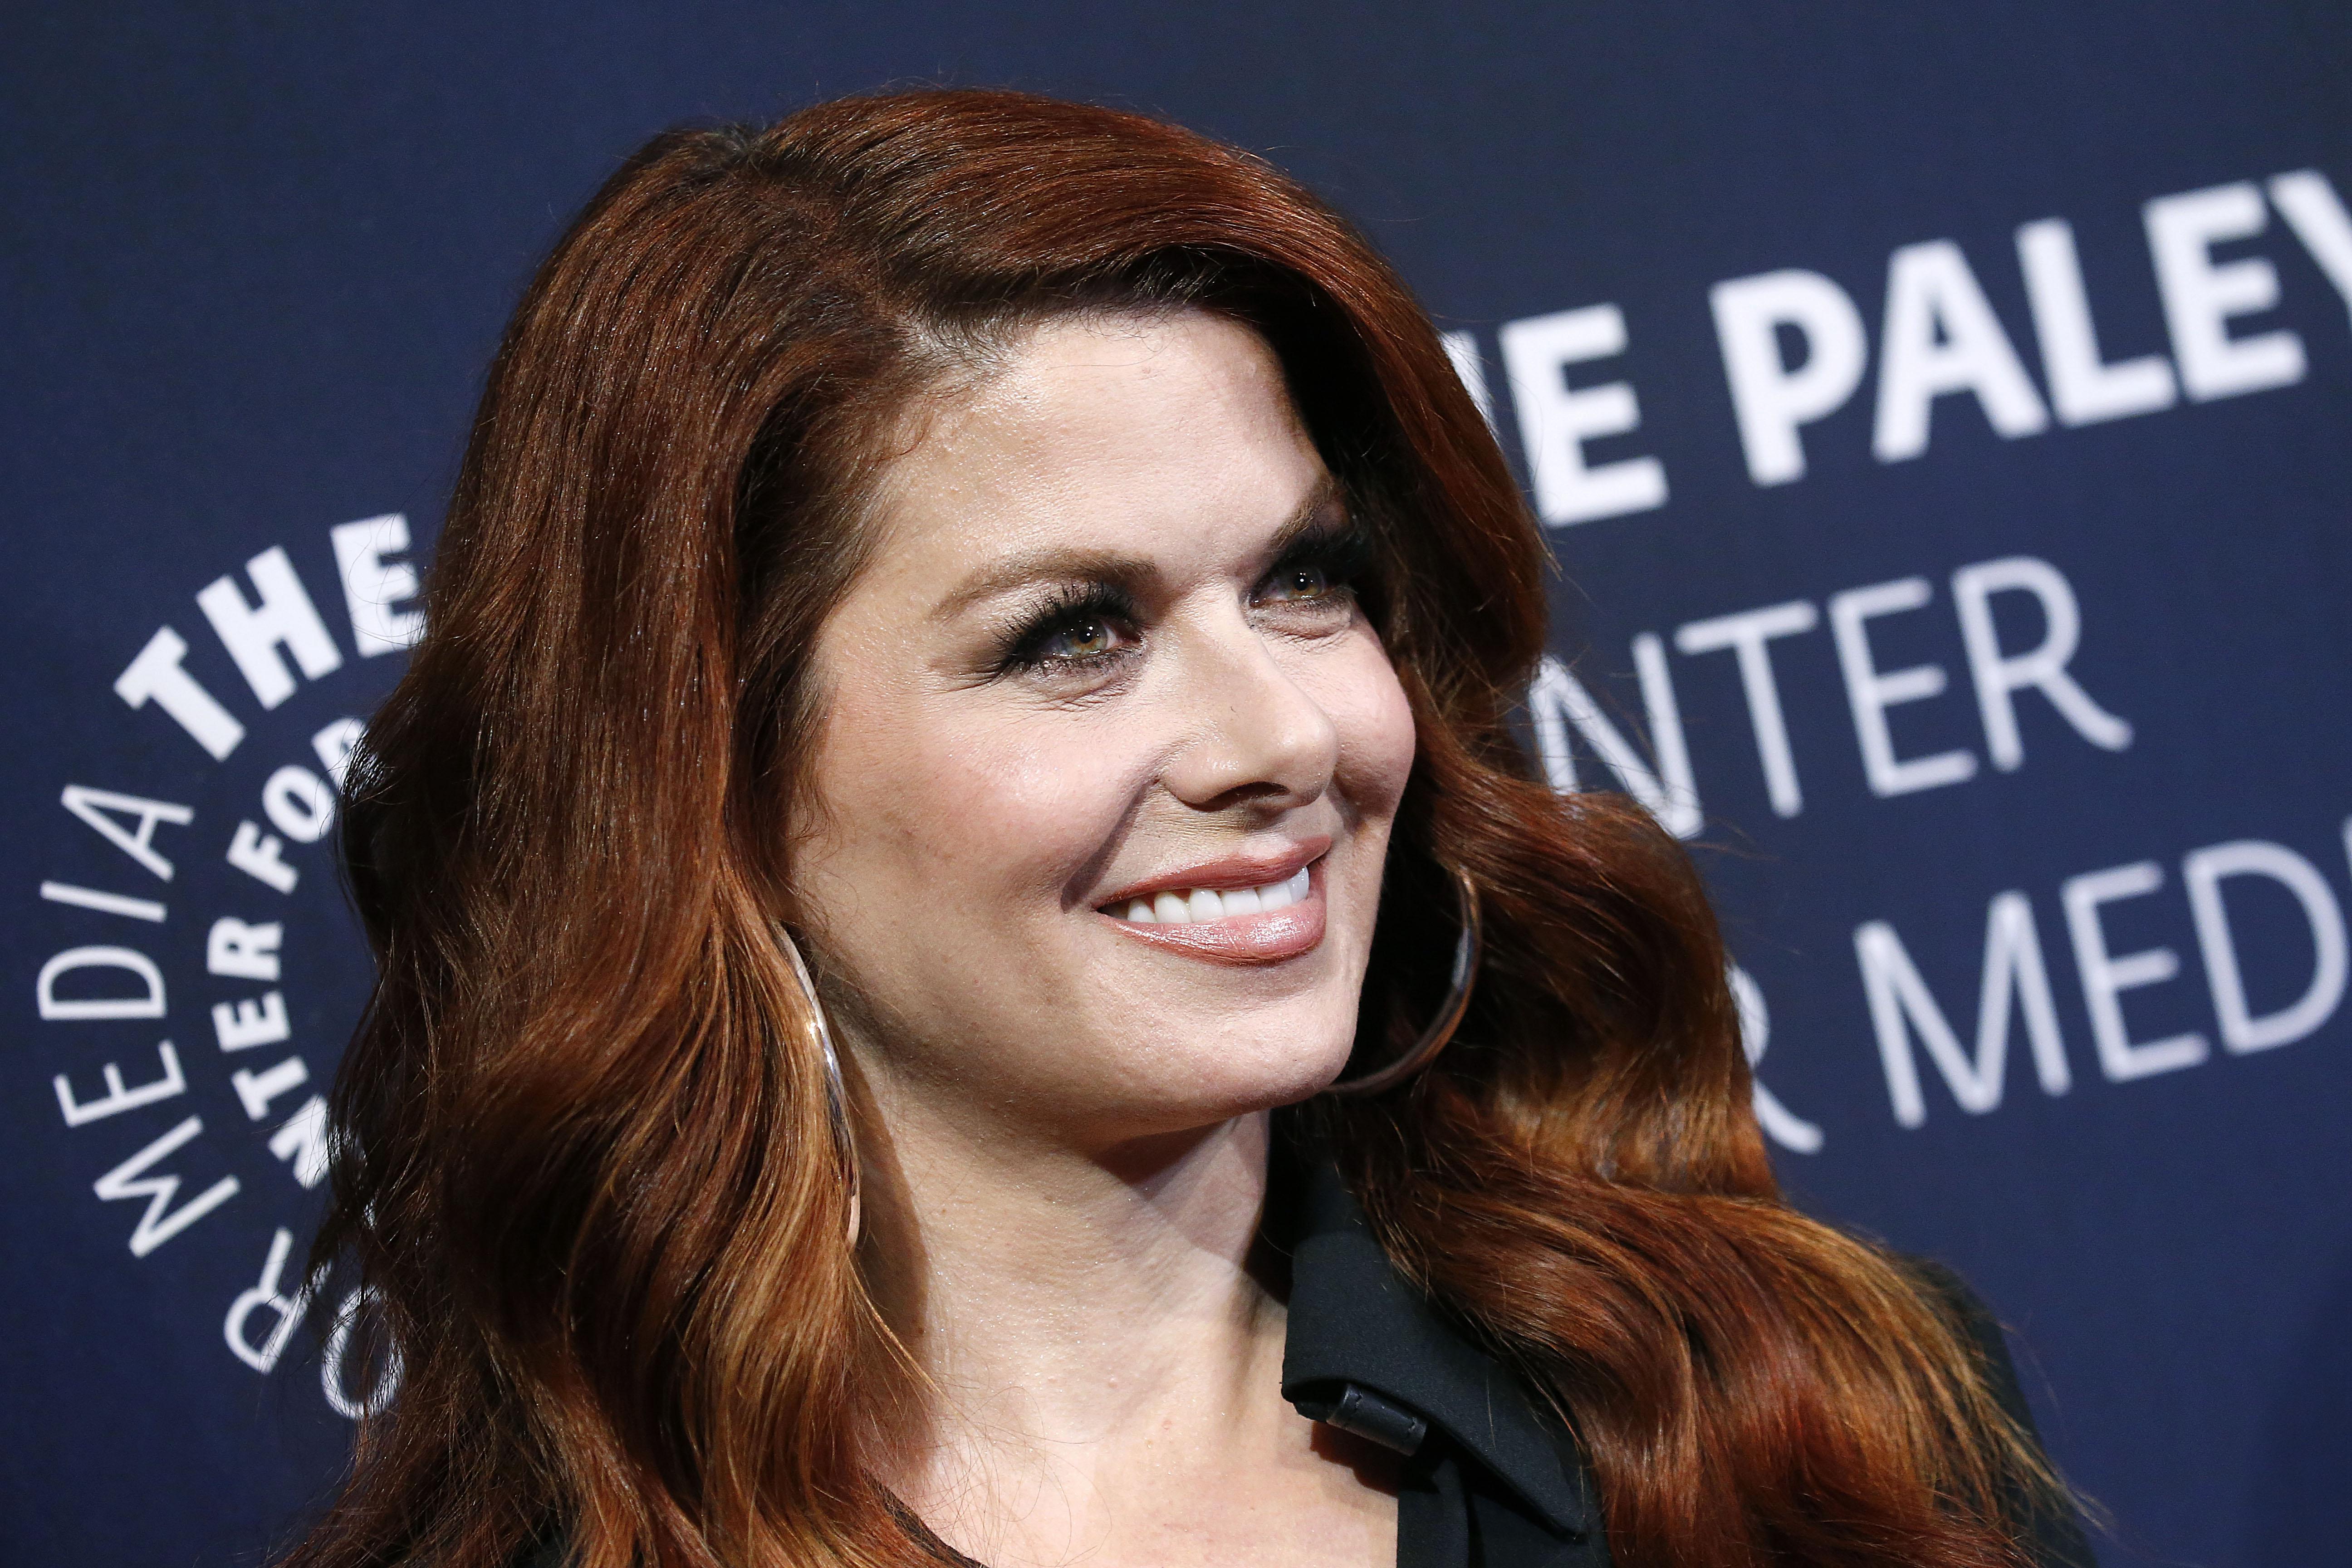 Debra Messing on a Paley Center red carpet.